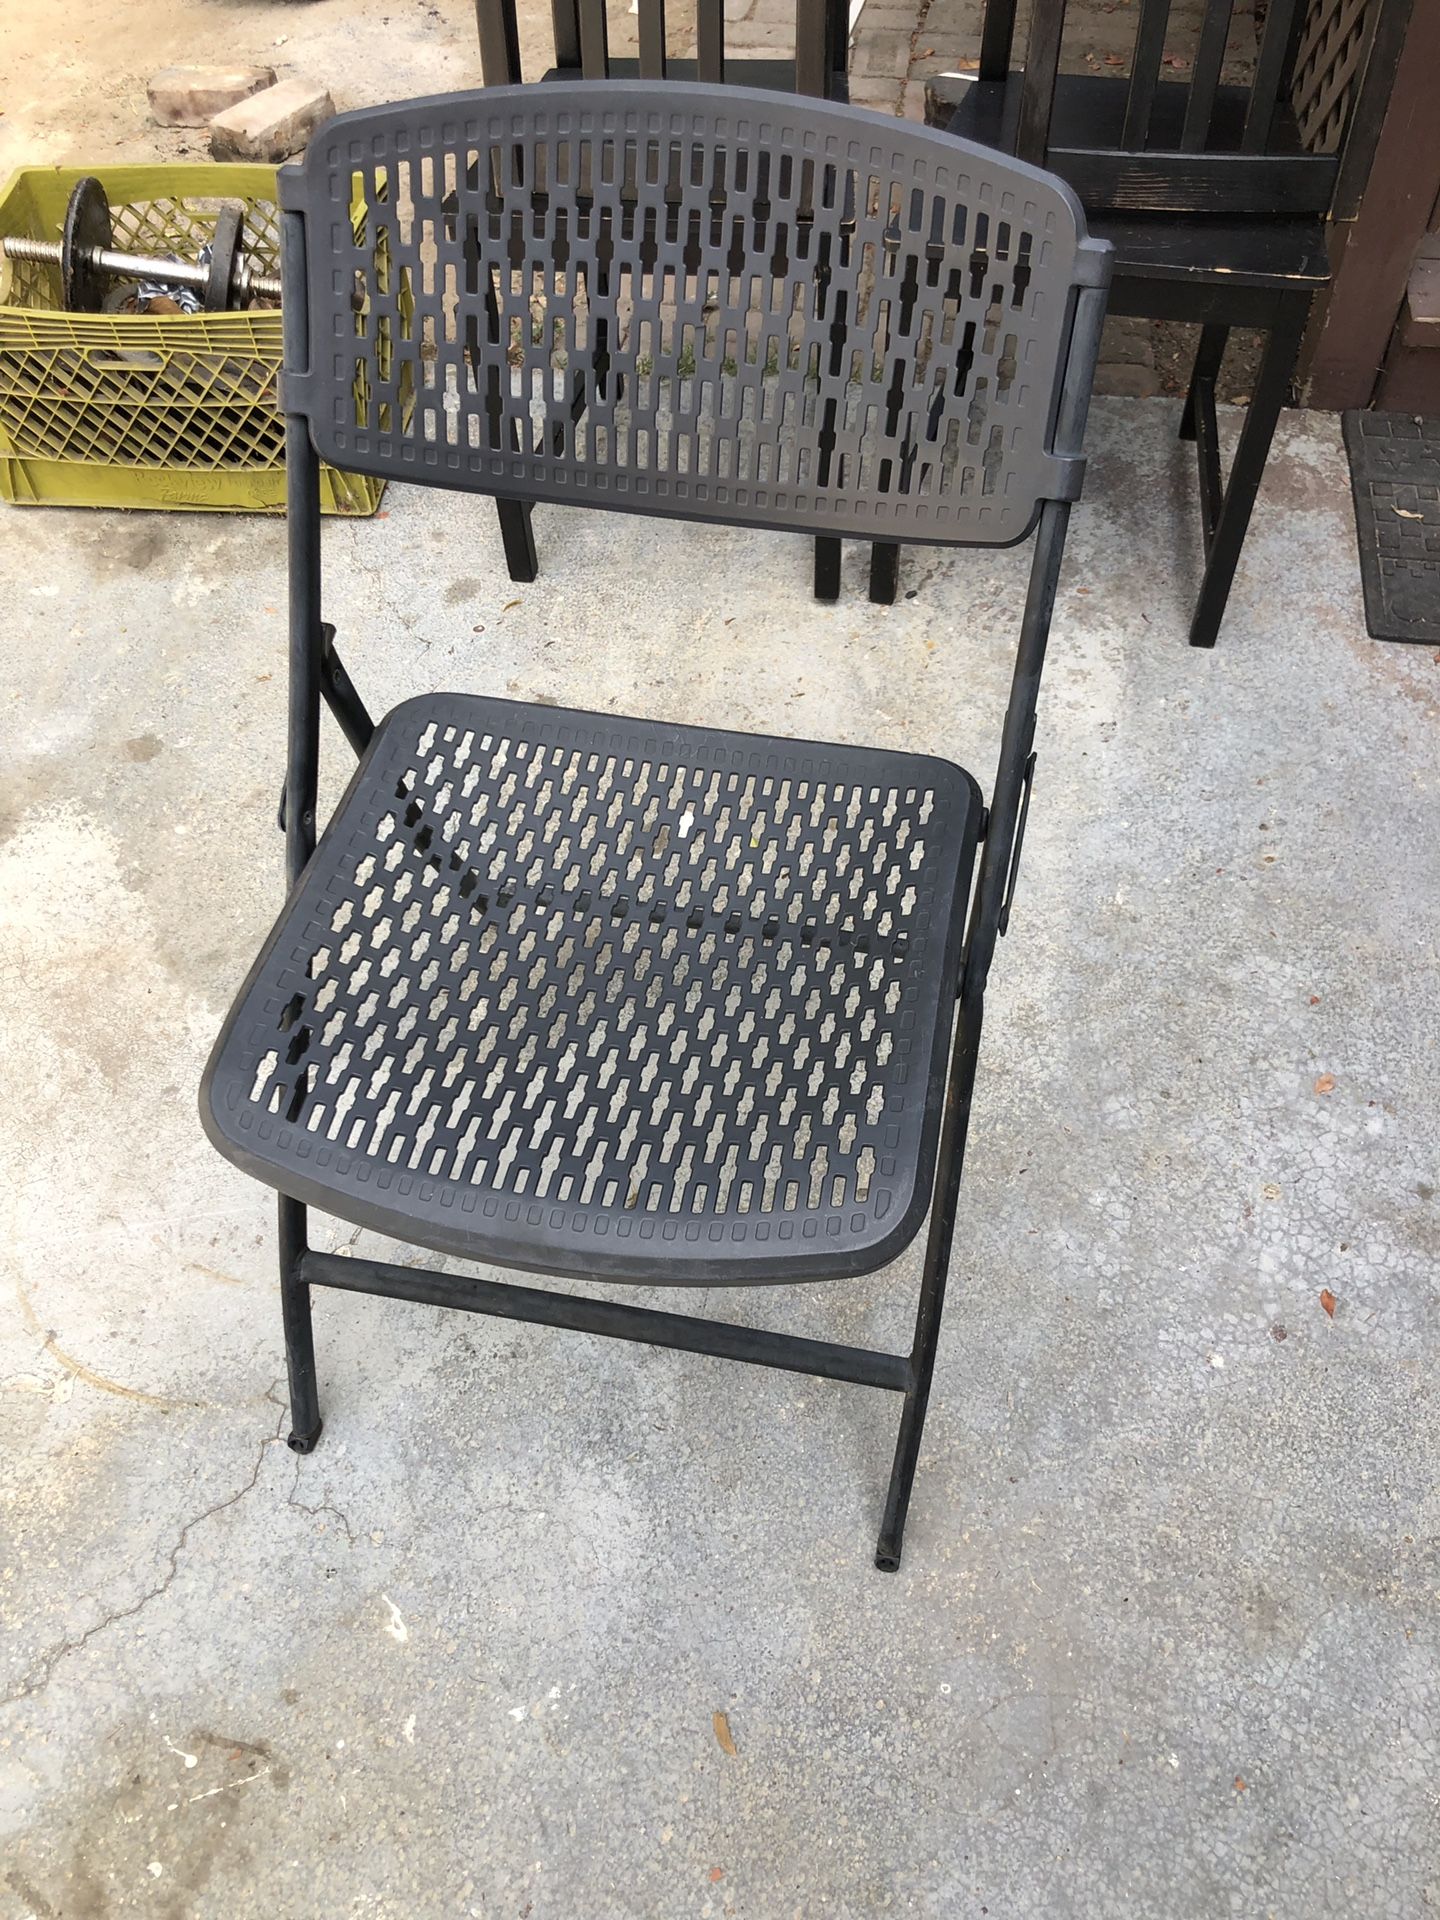 FREE - chairs